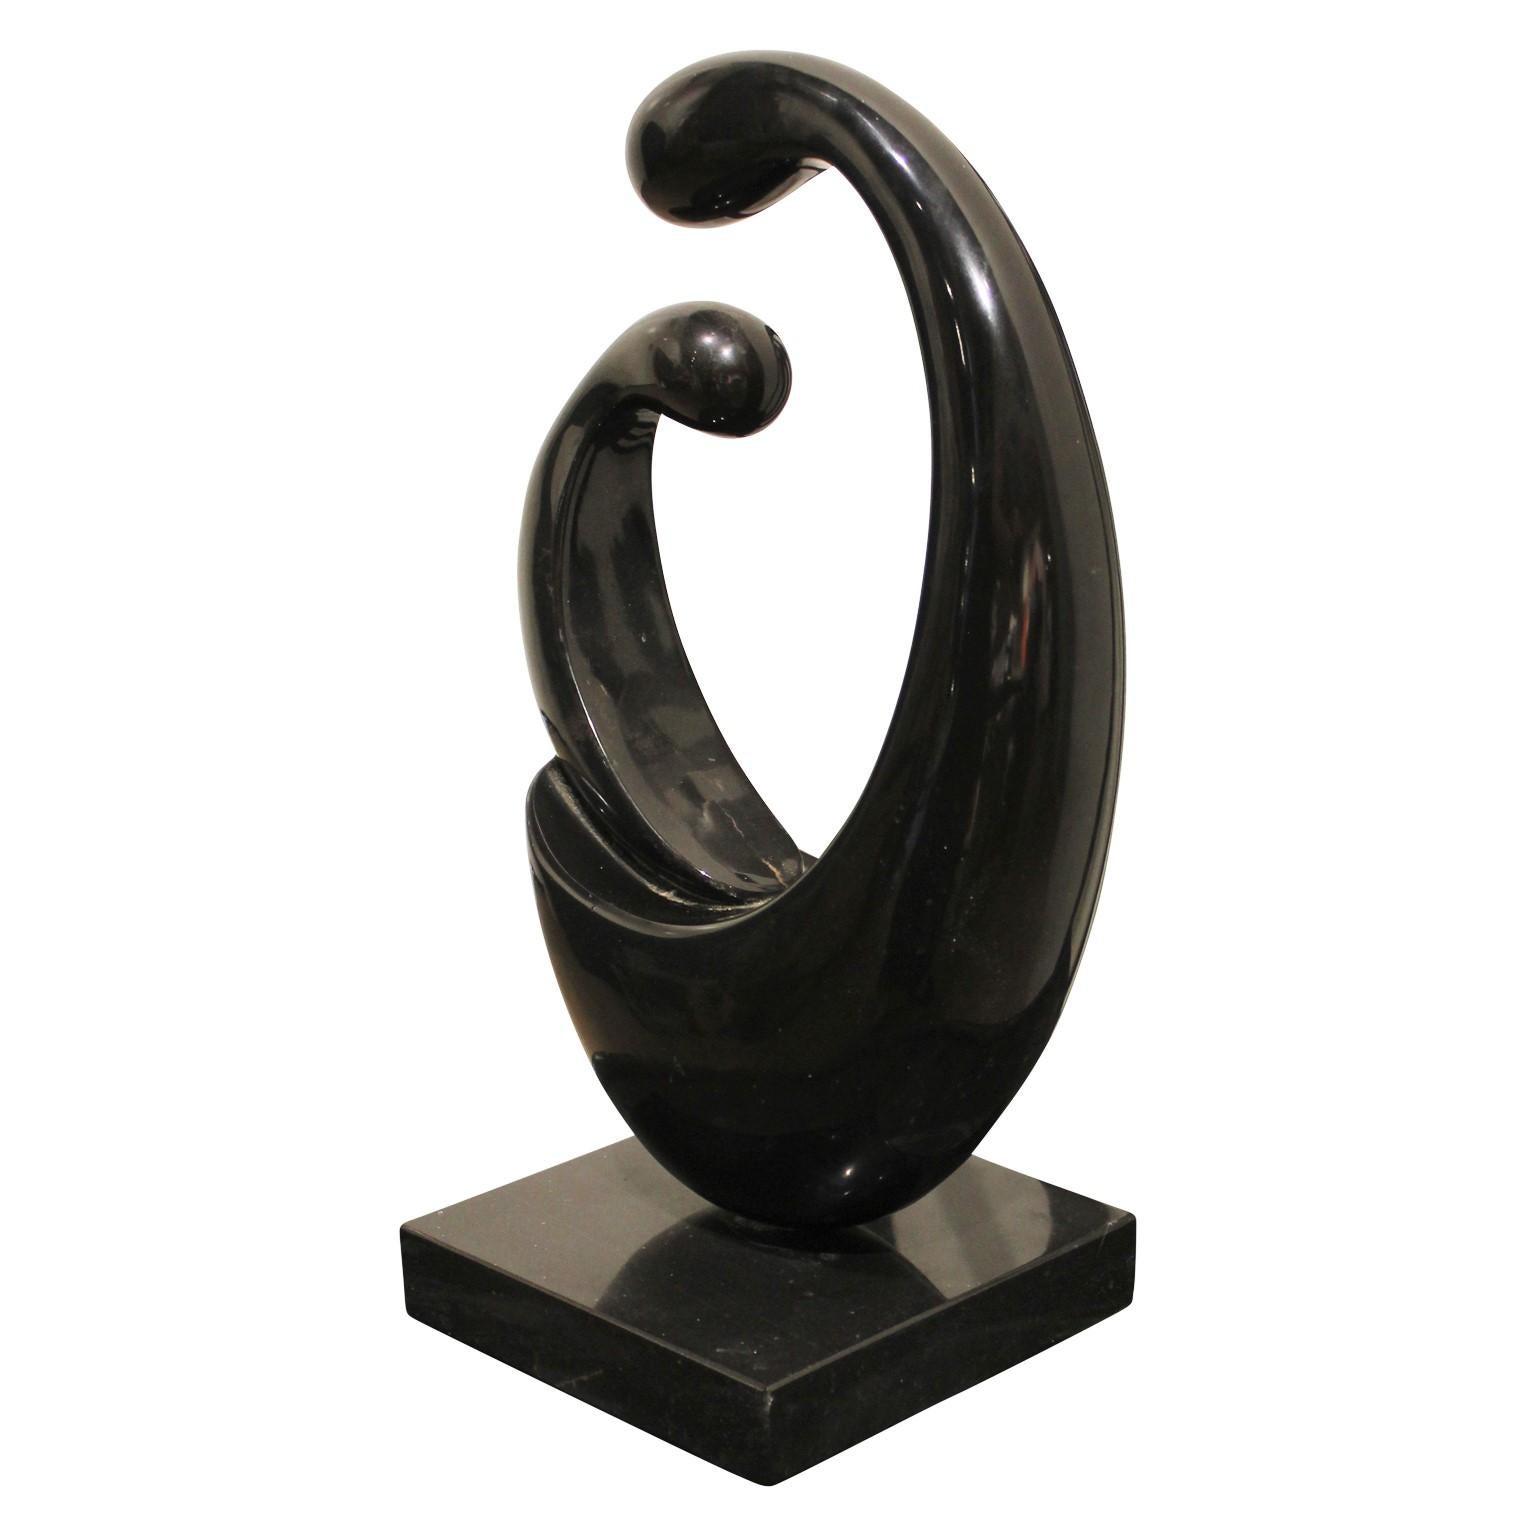 Madonna and Child Sculpture - Black Abstract Sculpture by Unknown